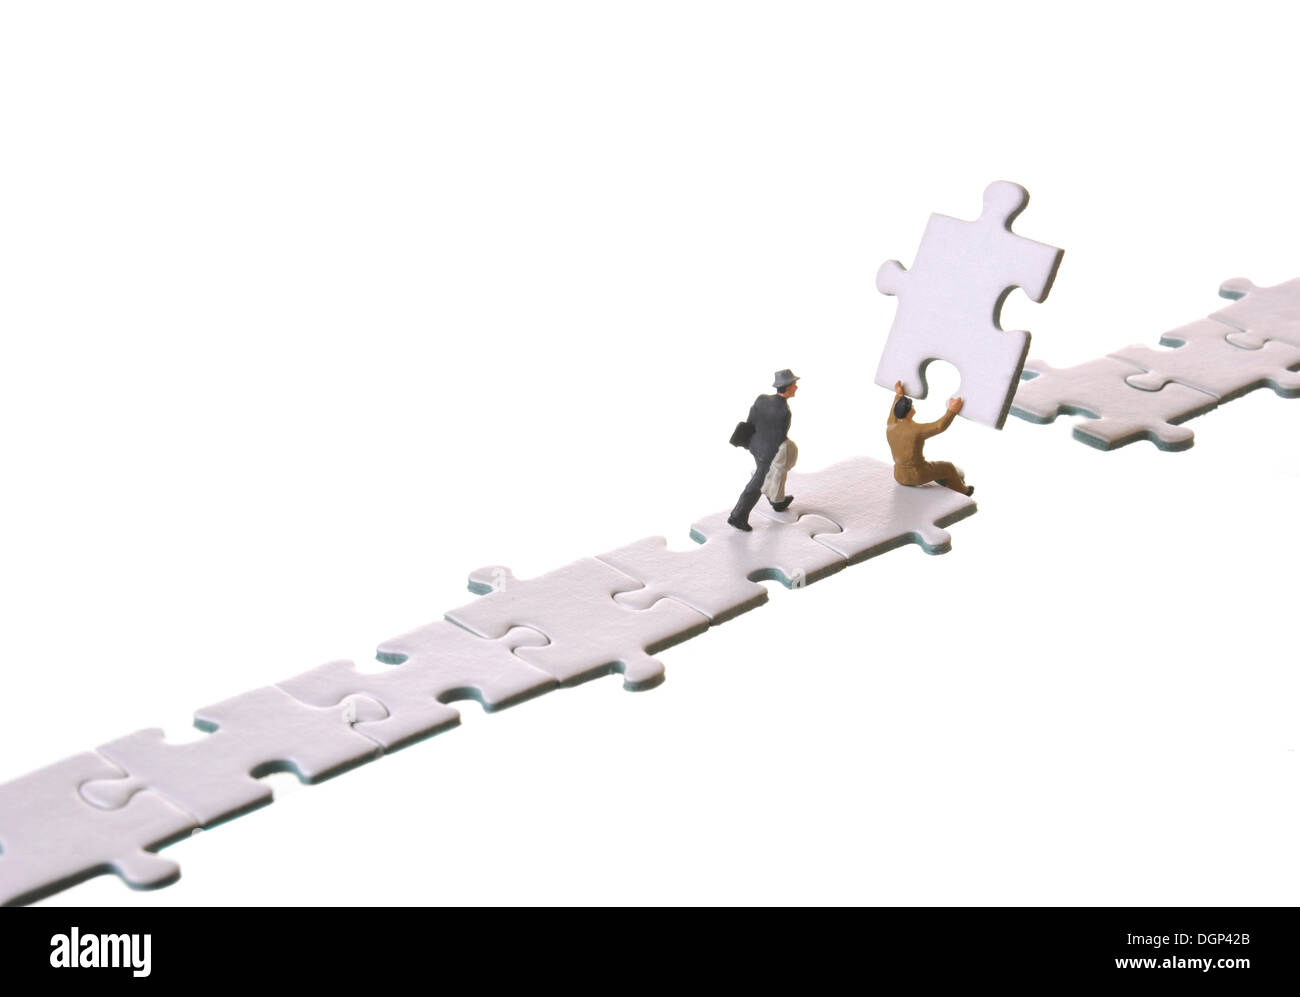 Figures of businessmen building a bridge with puzzle pieces, symbolic image for connections Stock Photo